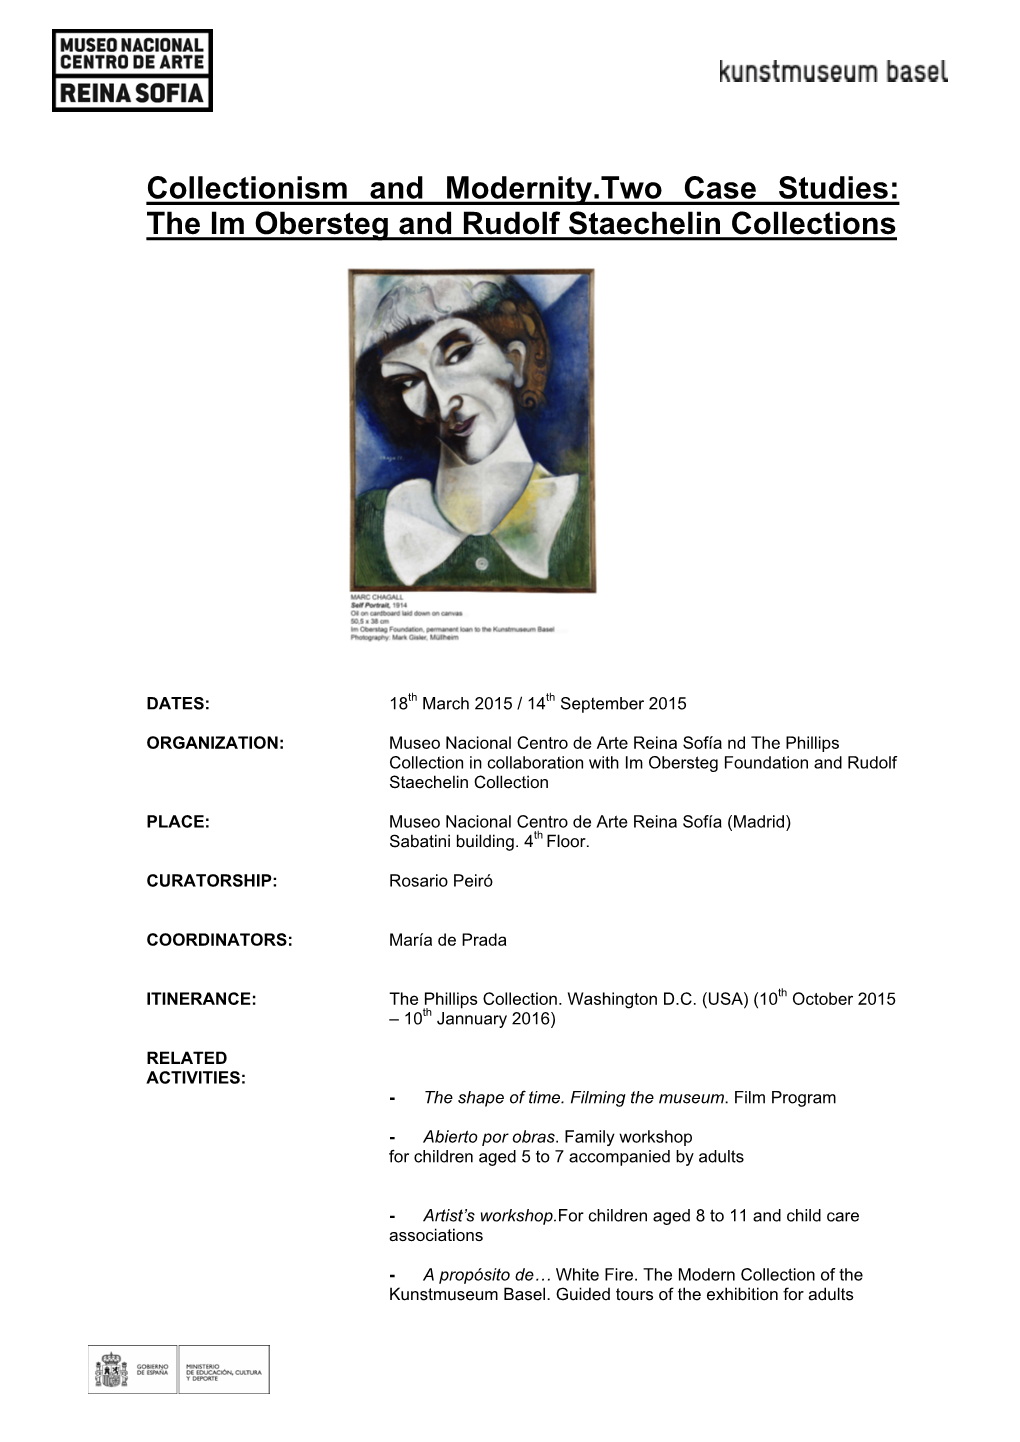 The Im Obersteg and Rudolf Staechelin Collections